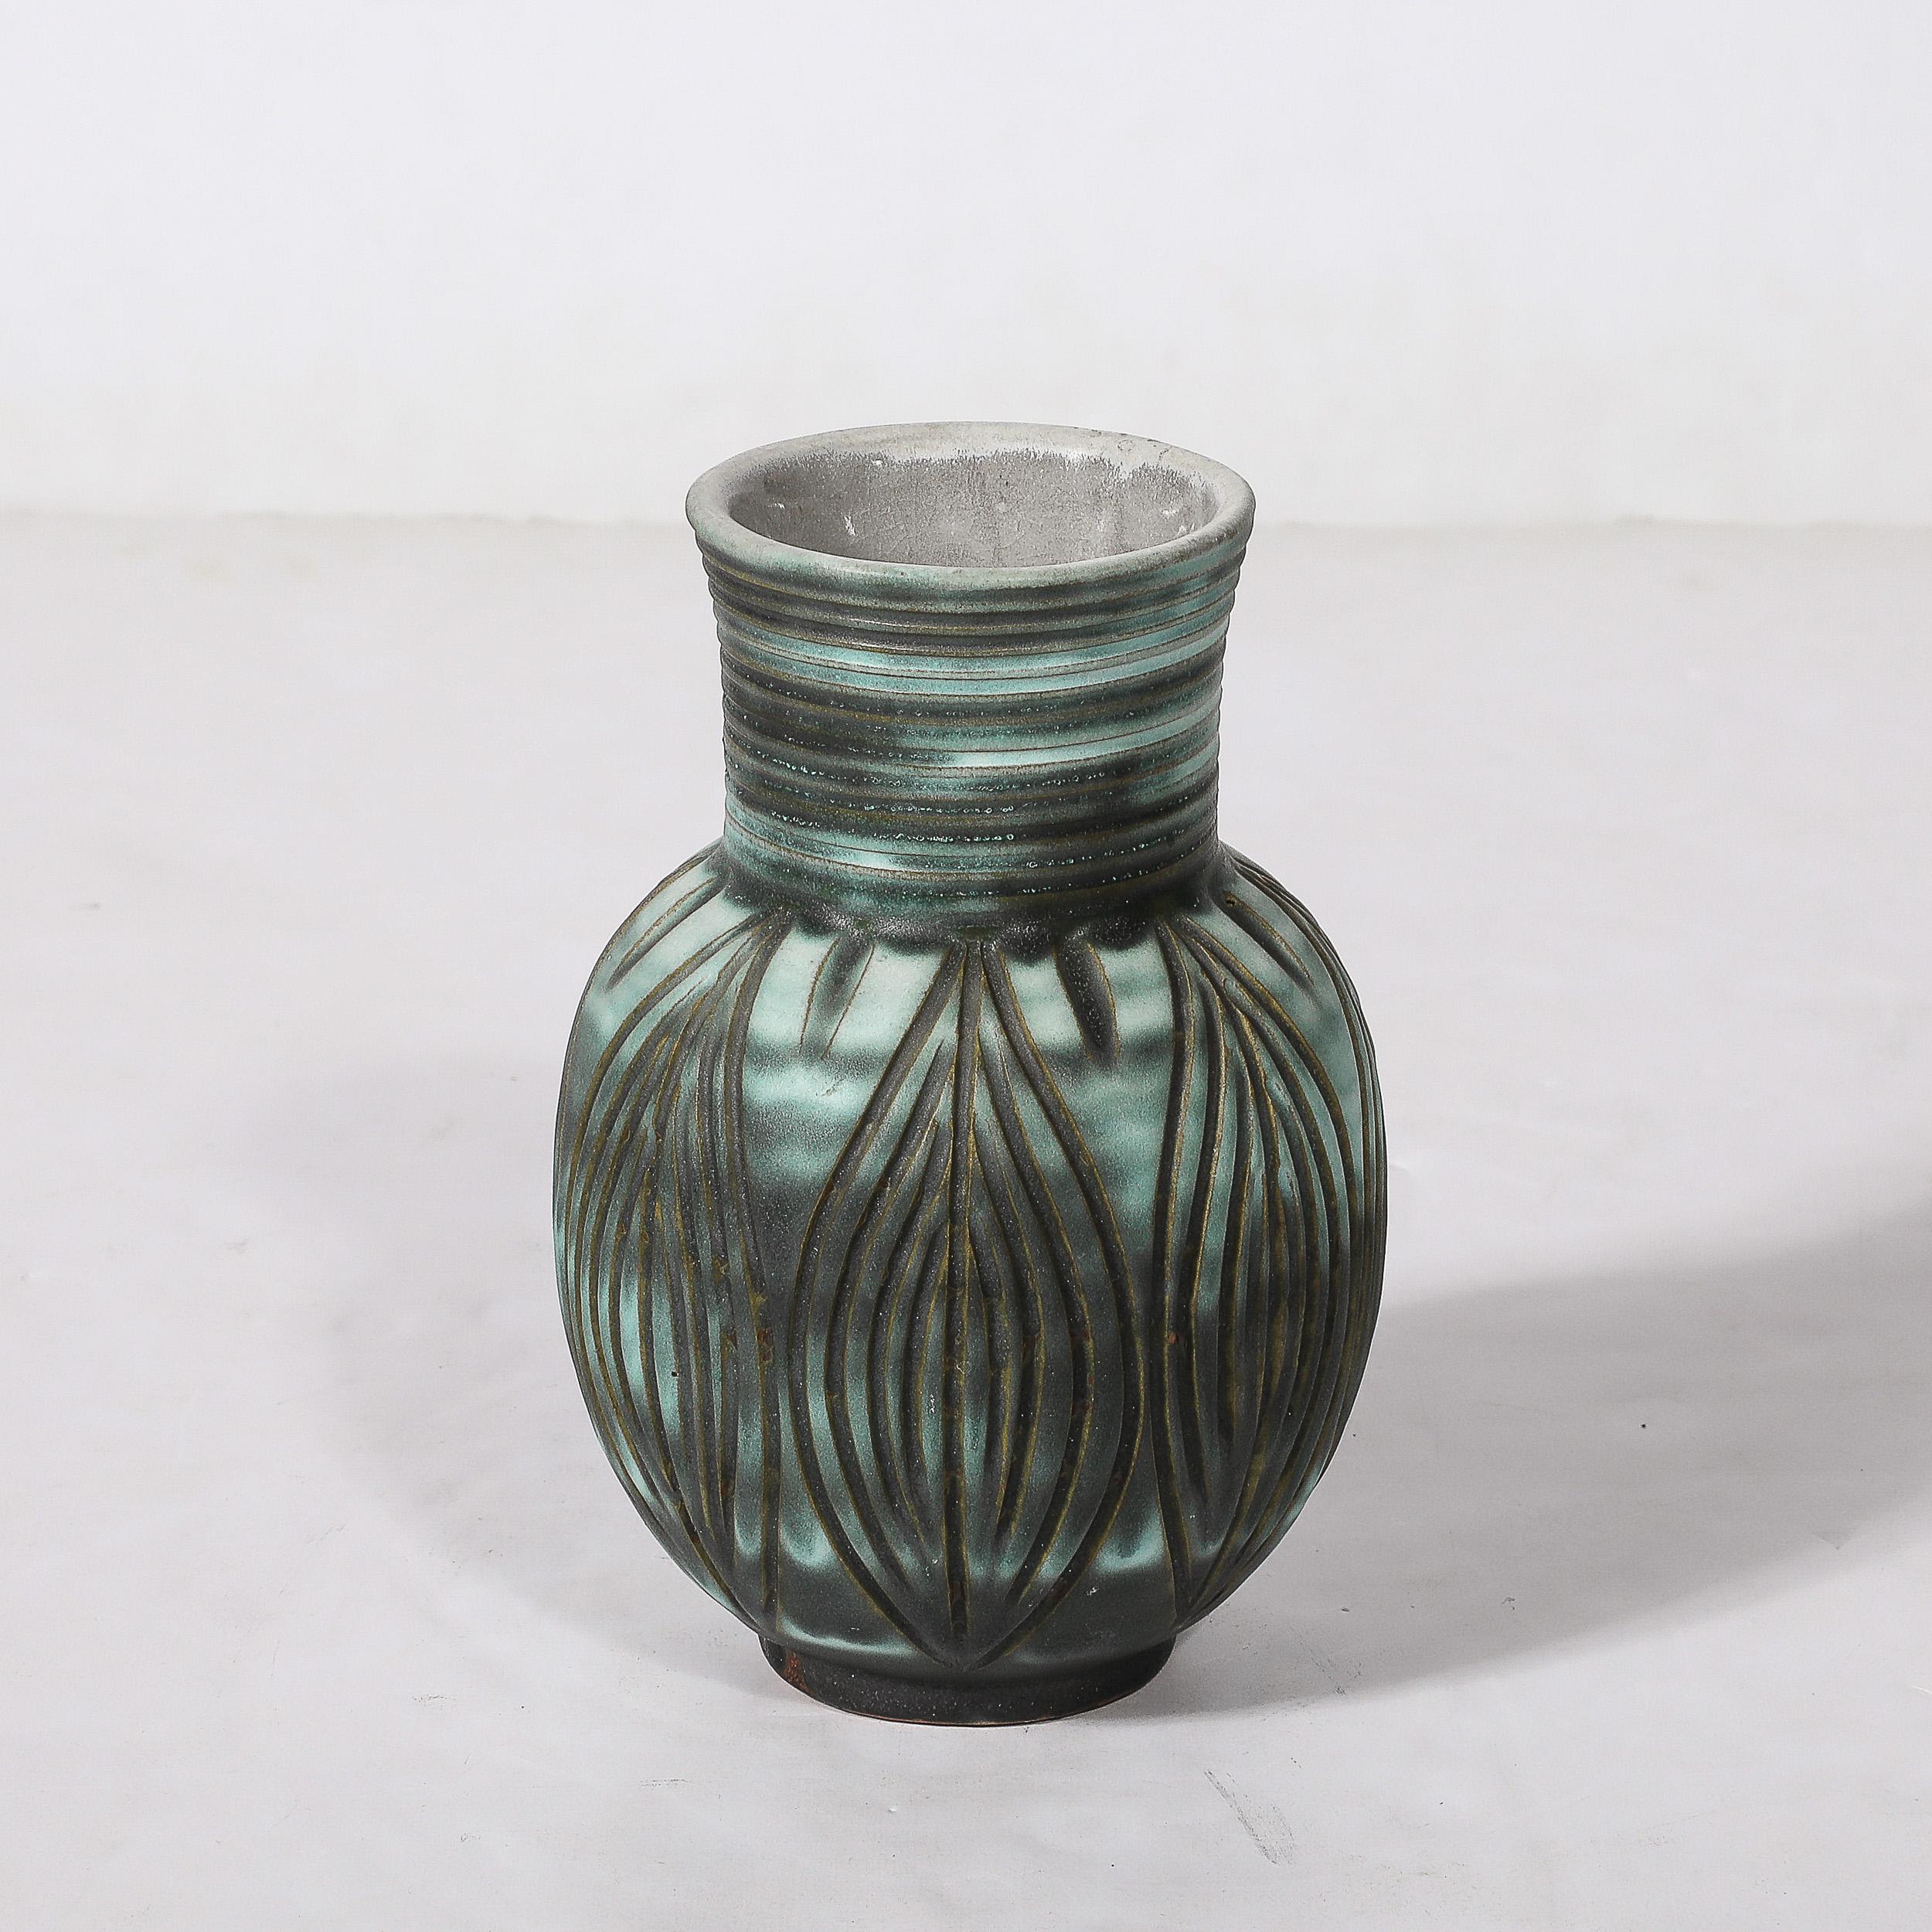 This rare and beautifully rendered Mid-Century Modernist Teal/Smoked Umber Vase w/ Linear Grooved Detailing is by the esteemed company Design Techniques and originates from the United States, Circa 1970. Features a rounded body with a tapered neck